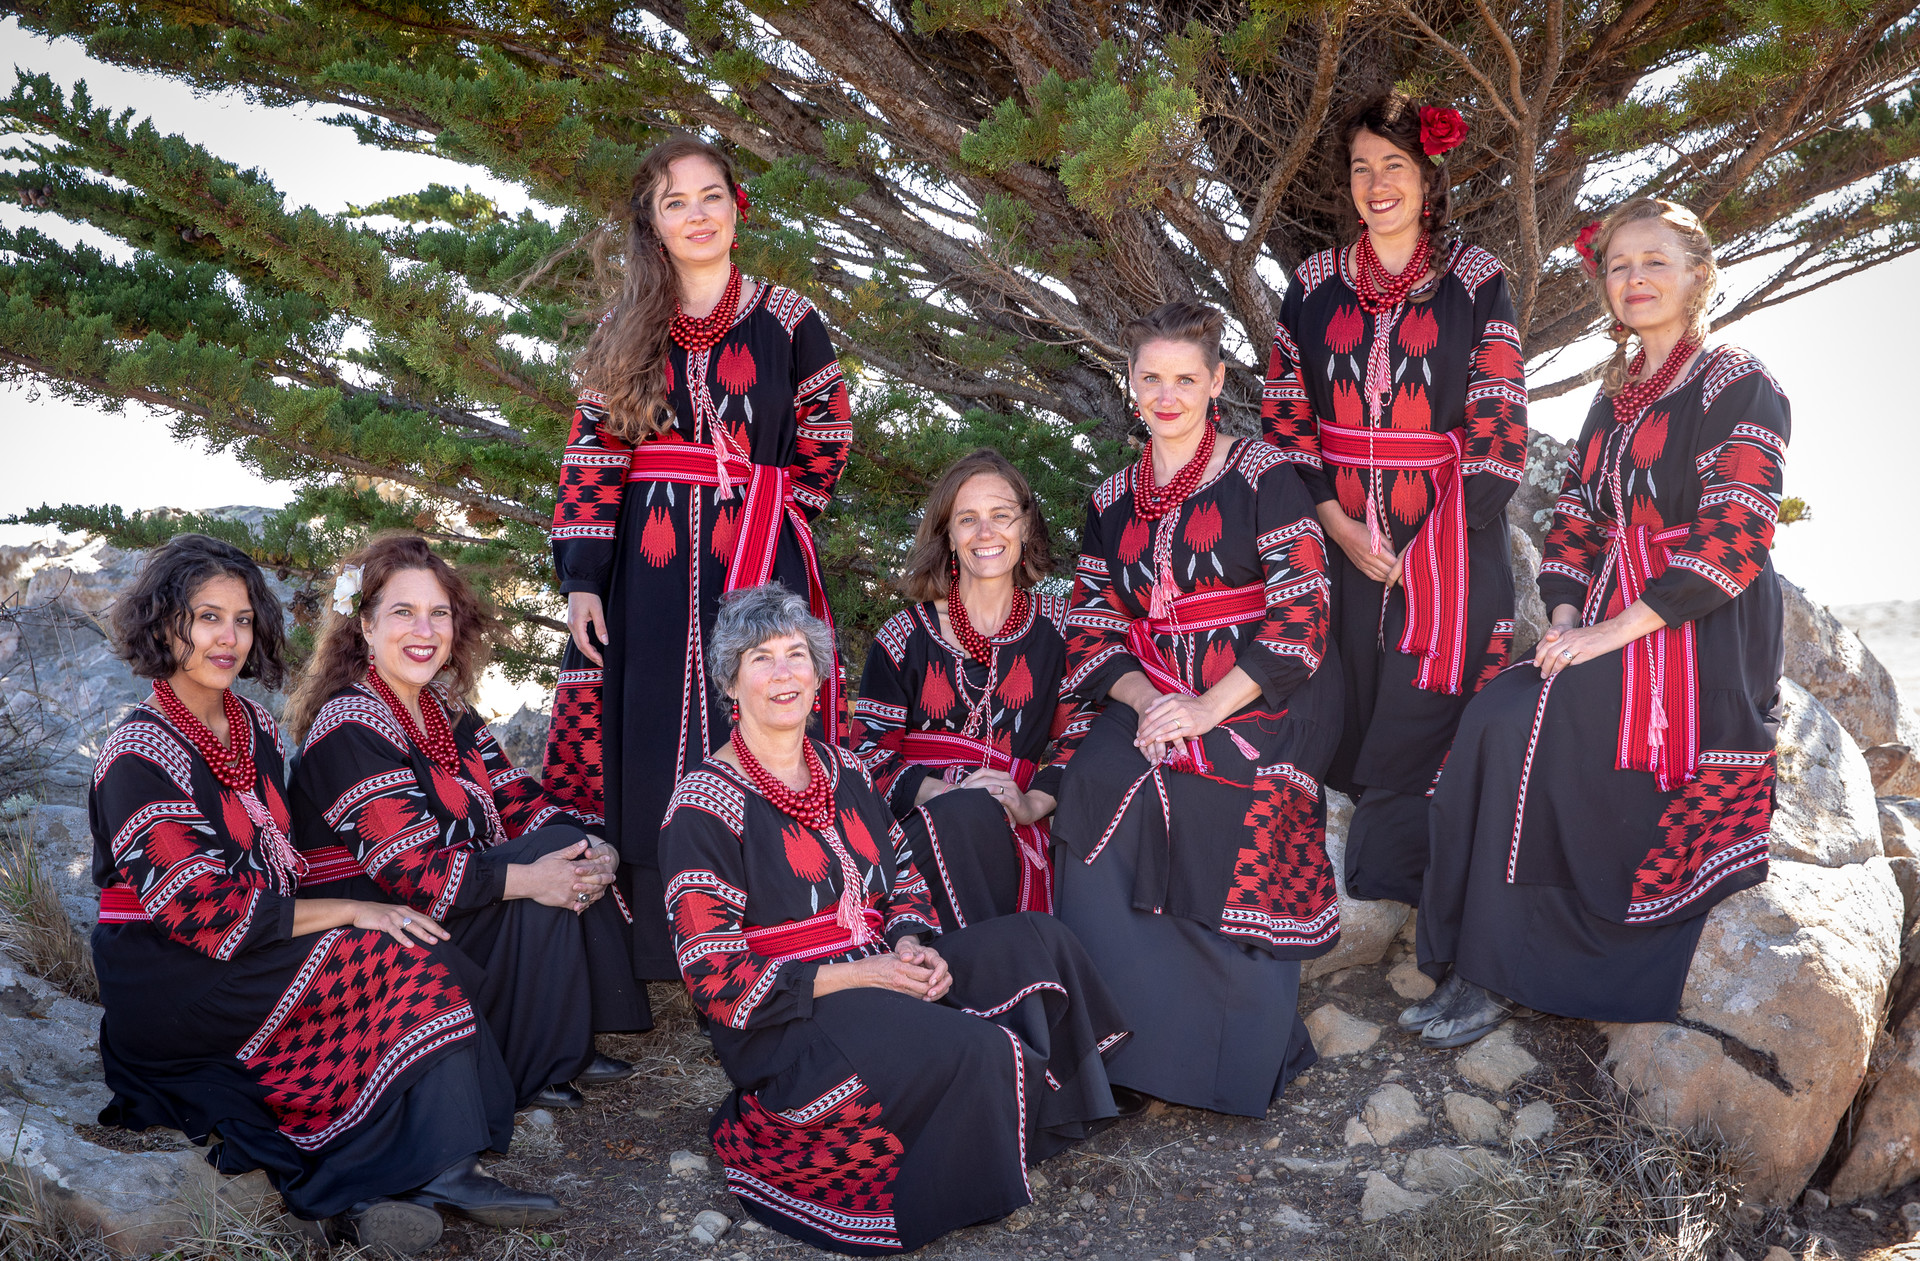 Bay Area institution Kitka is celebrating its 40th year performing traditional folk music from Europe and Eurasia, as well as introducing folk musicians from those regions to American audiences.